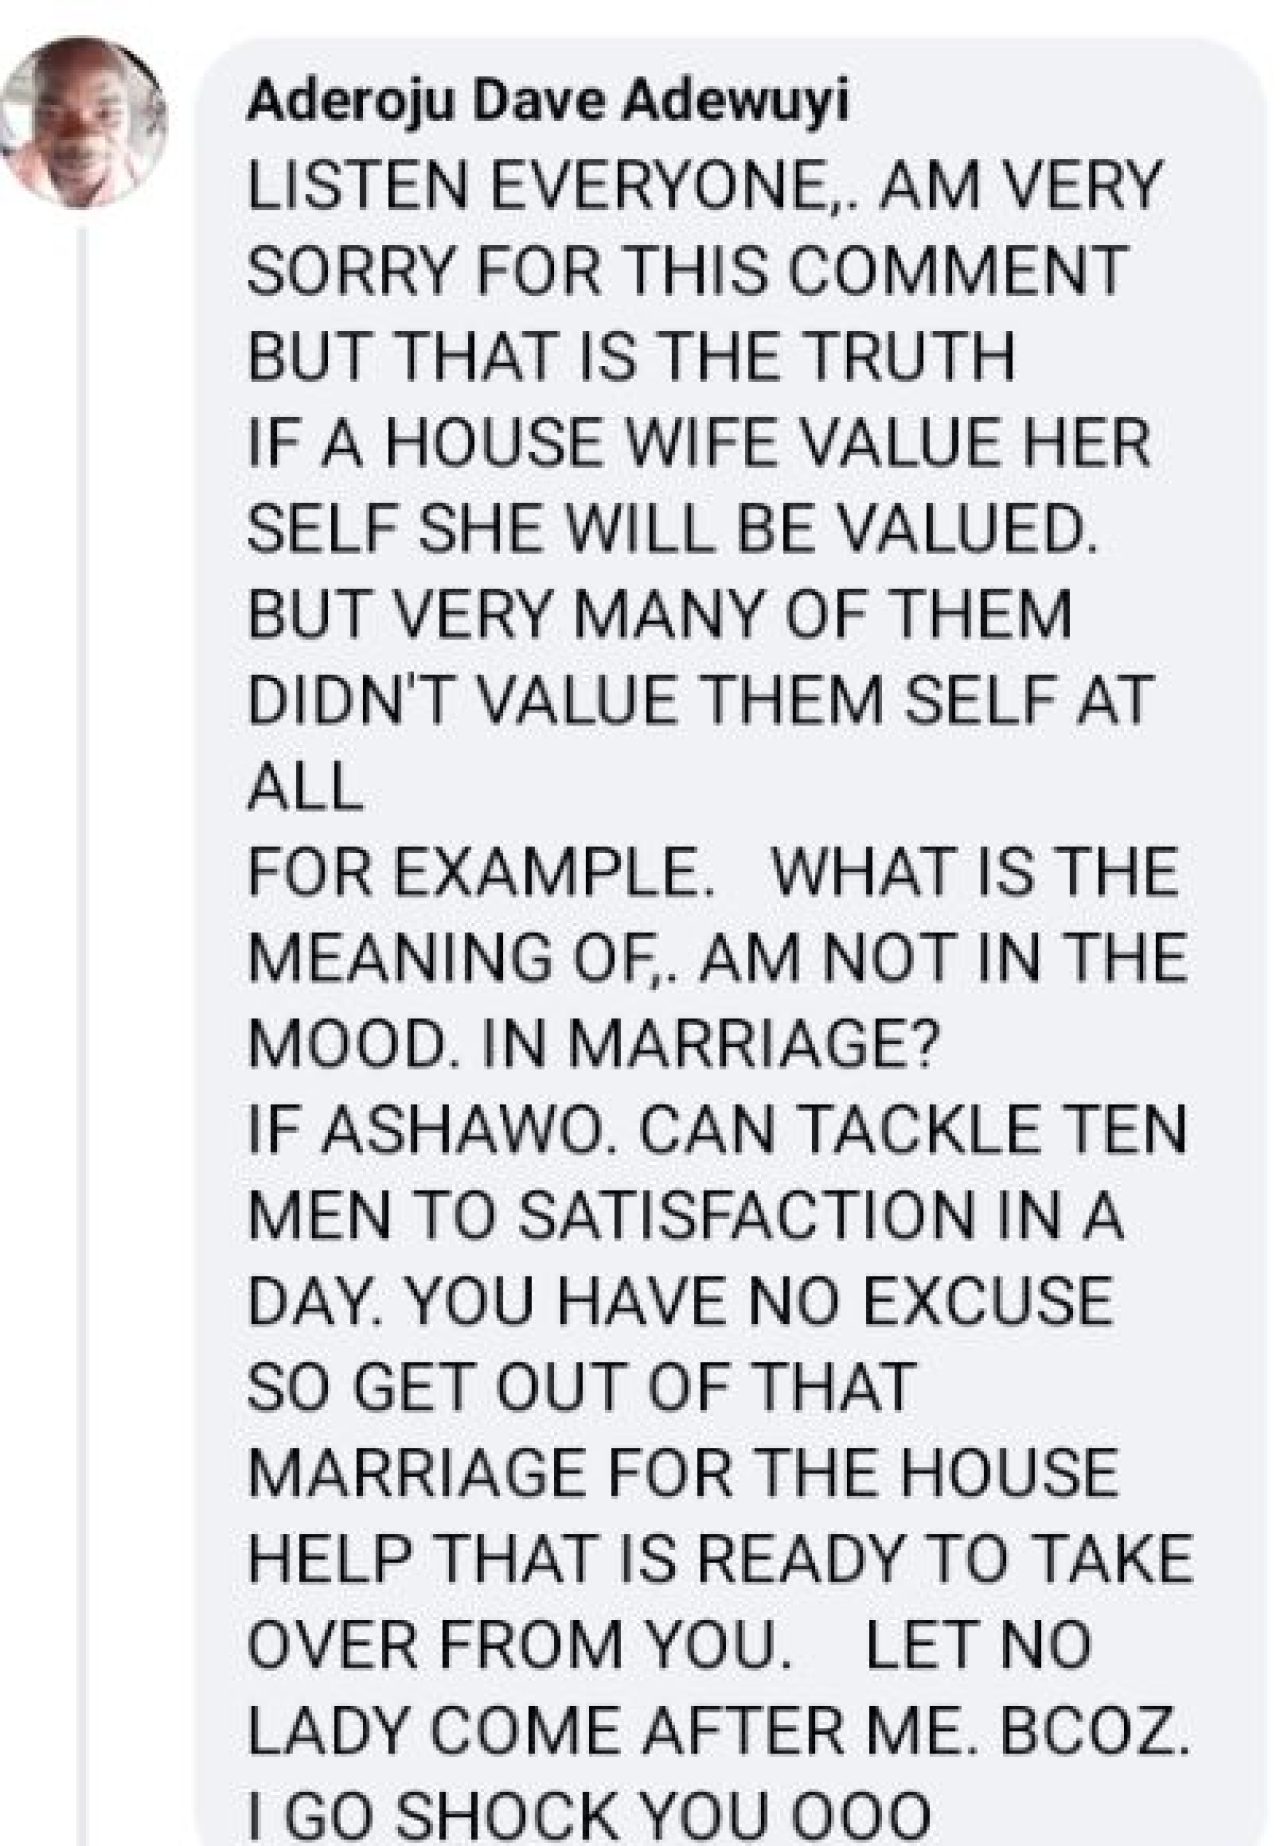 If 'Ashawo' can tackle 10 men daily, you have no excuse - Nigerian man chides married women. AdvertAfrica News on afronewswire.com: Amplifying Africa's Voice | afronewswire.com | Breaking News & Stories